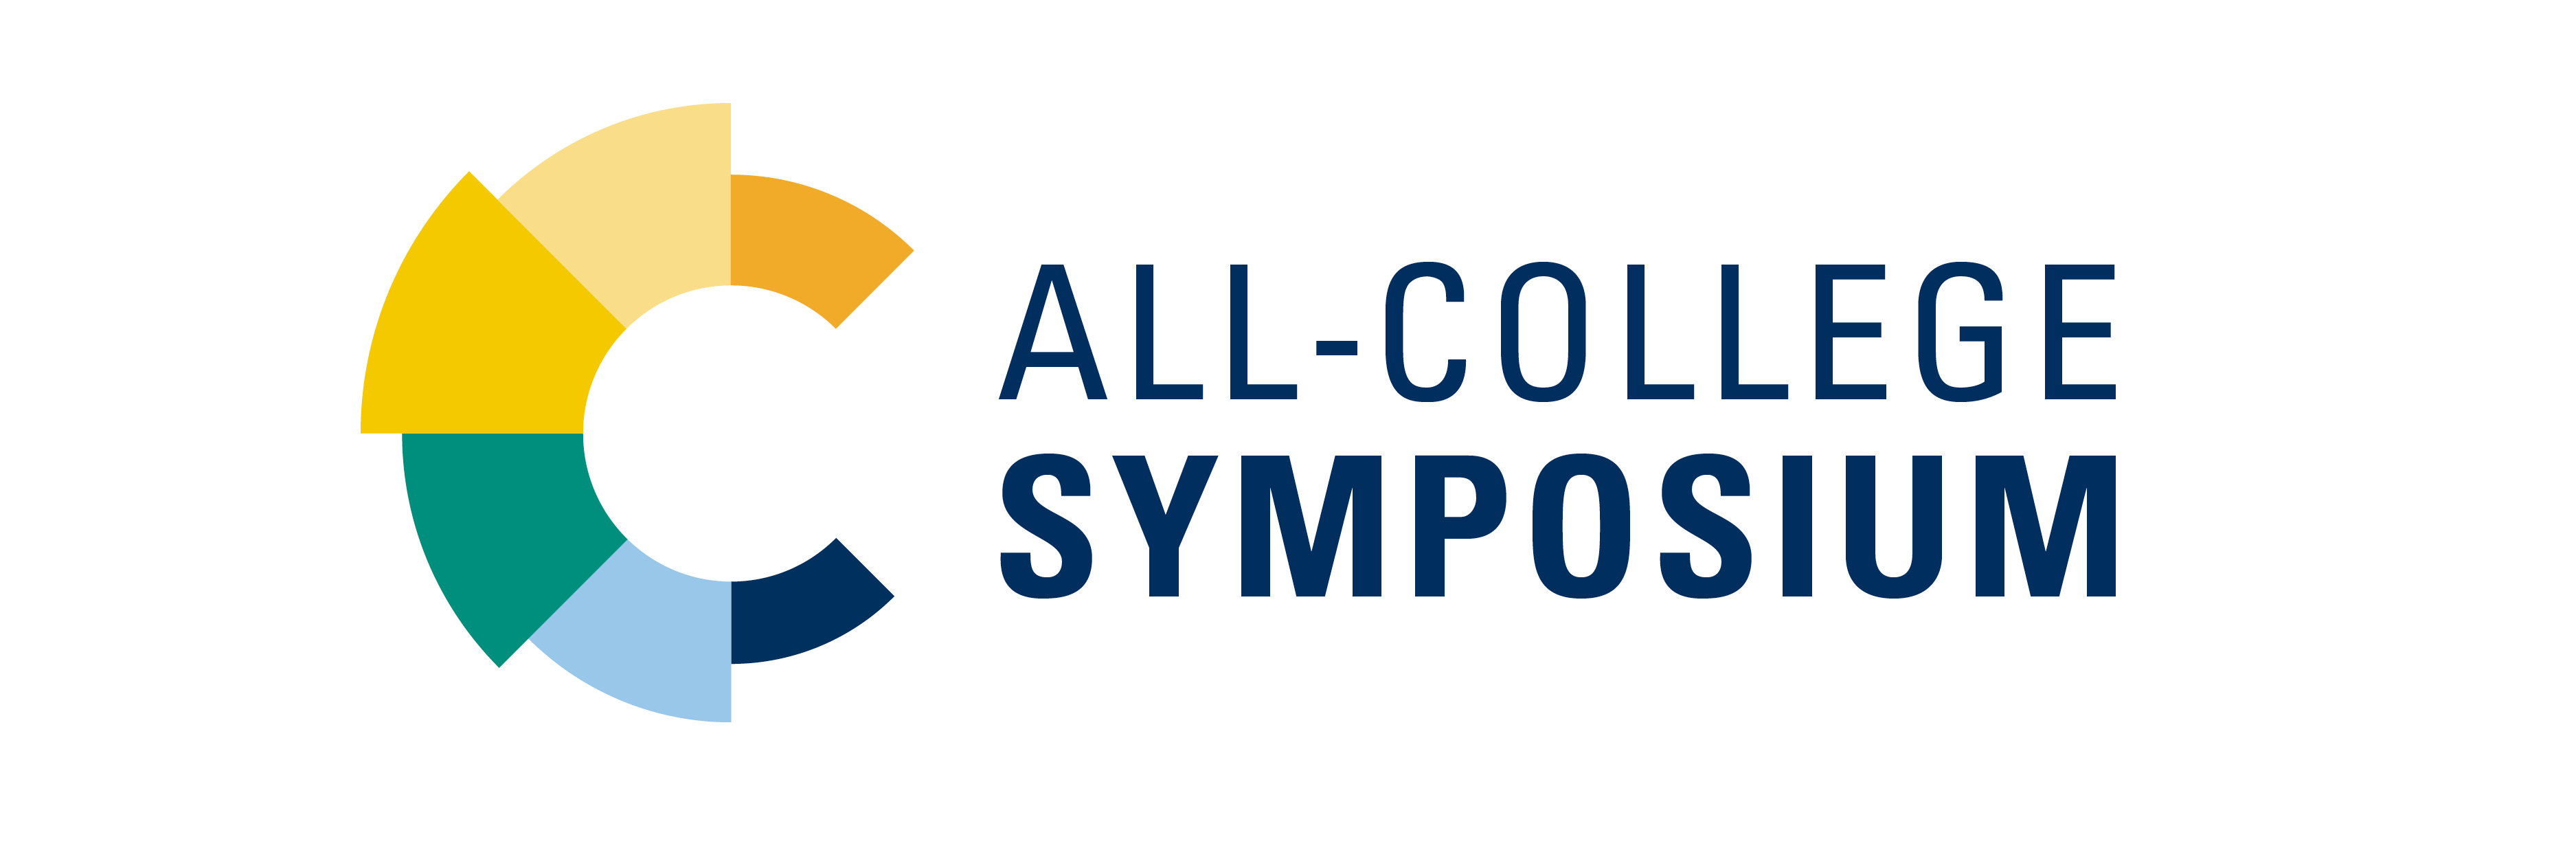 Announcing the All-College Symposium